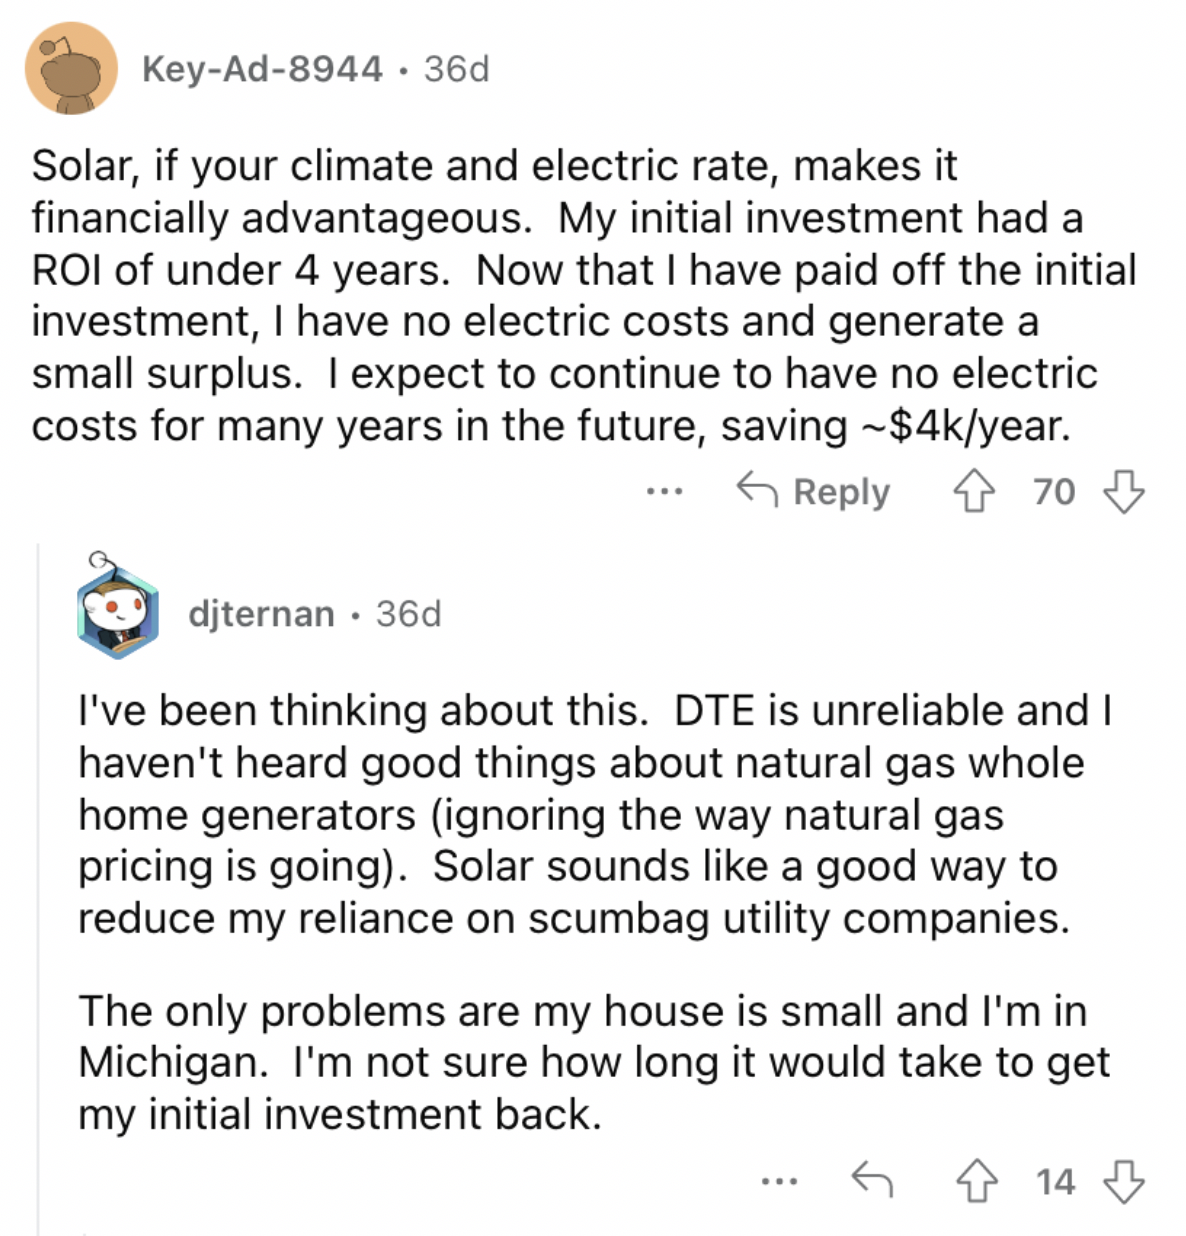 Reddit screenshot about the value of solar equipment.